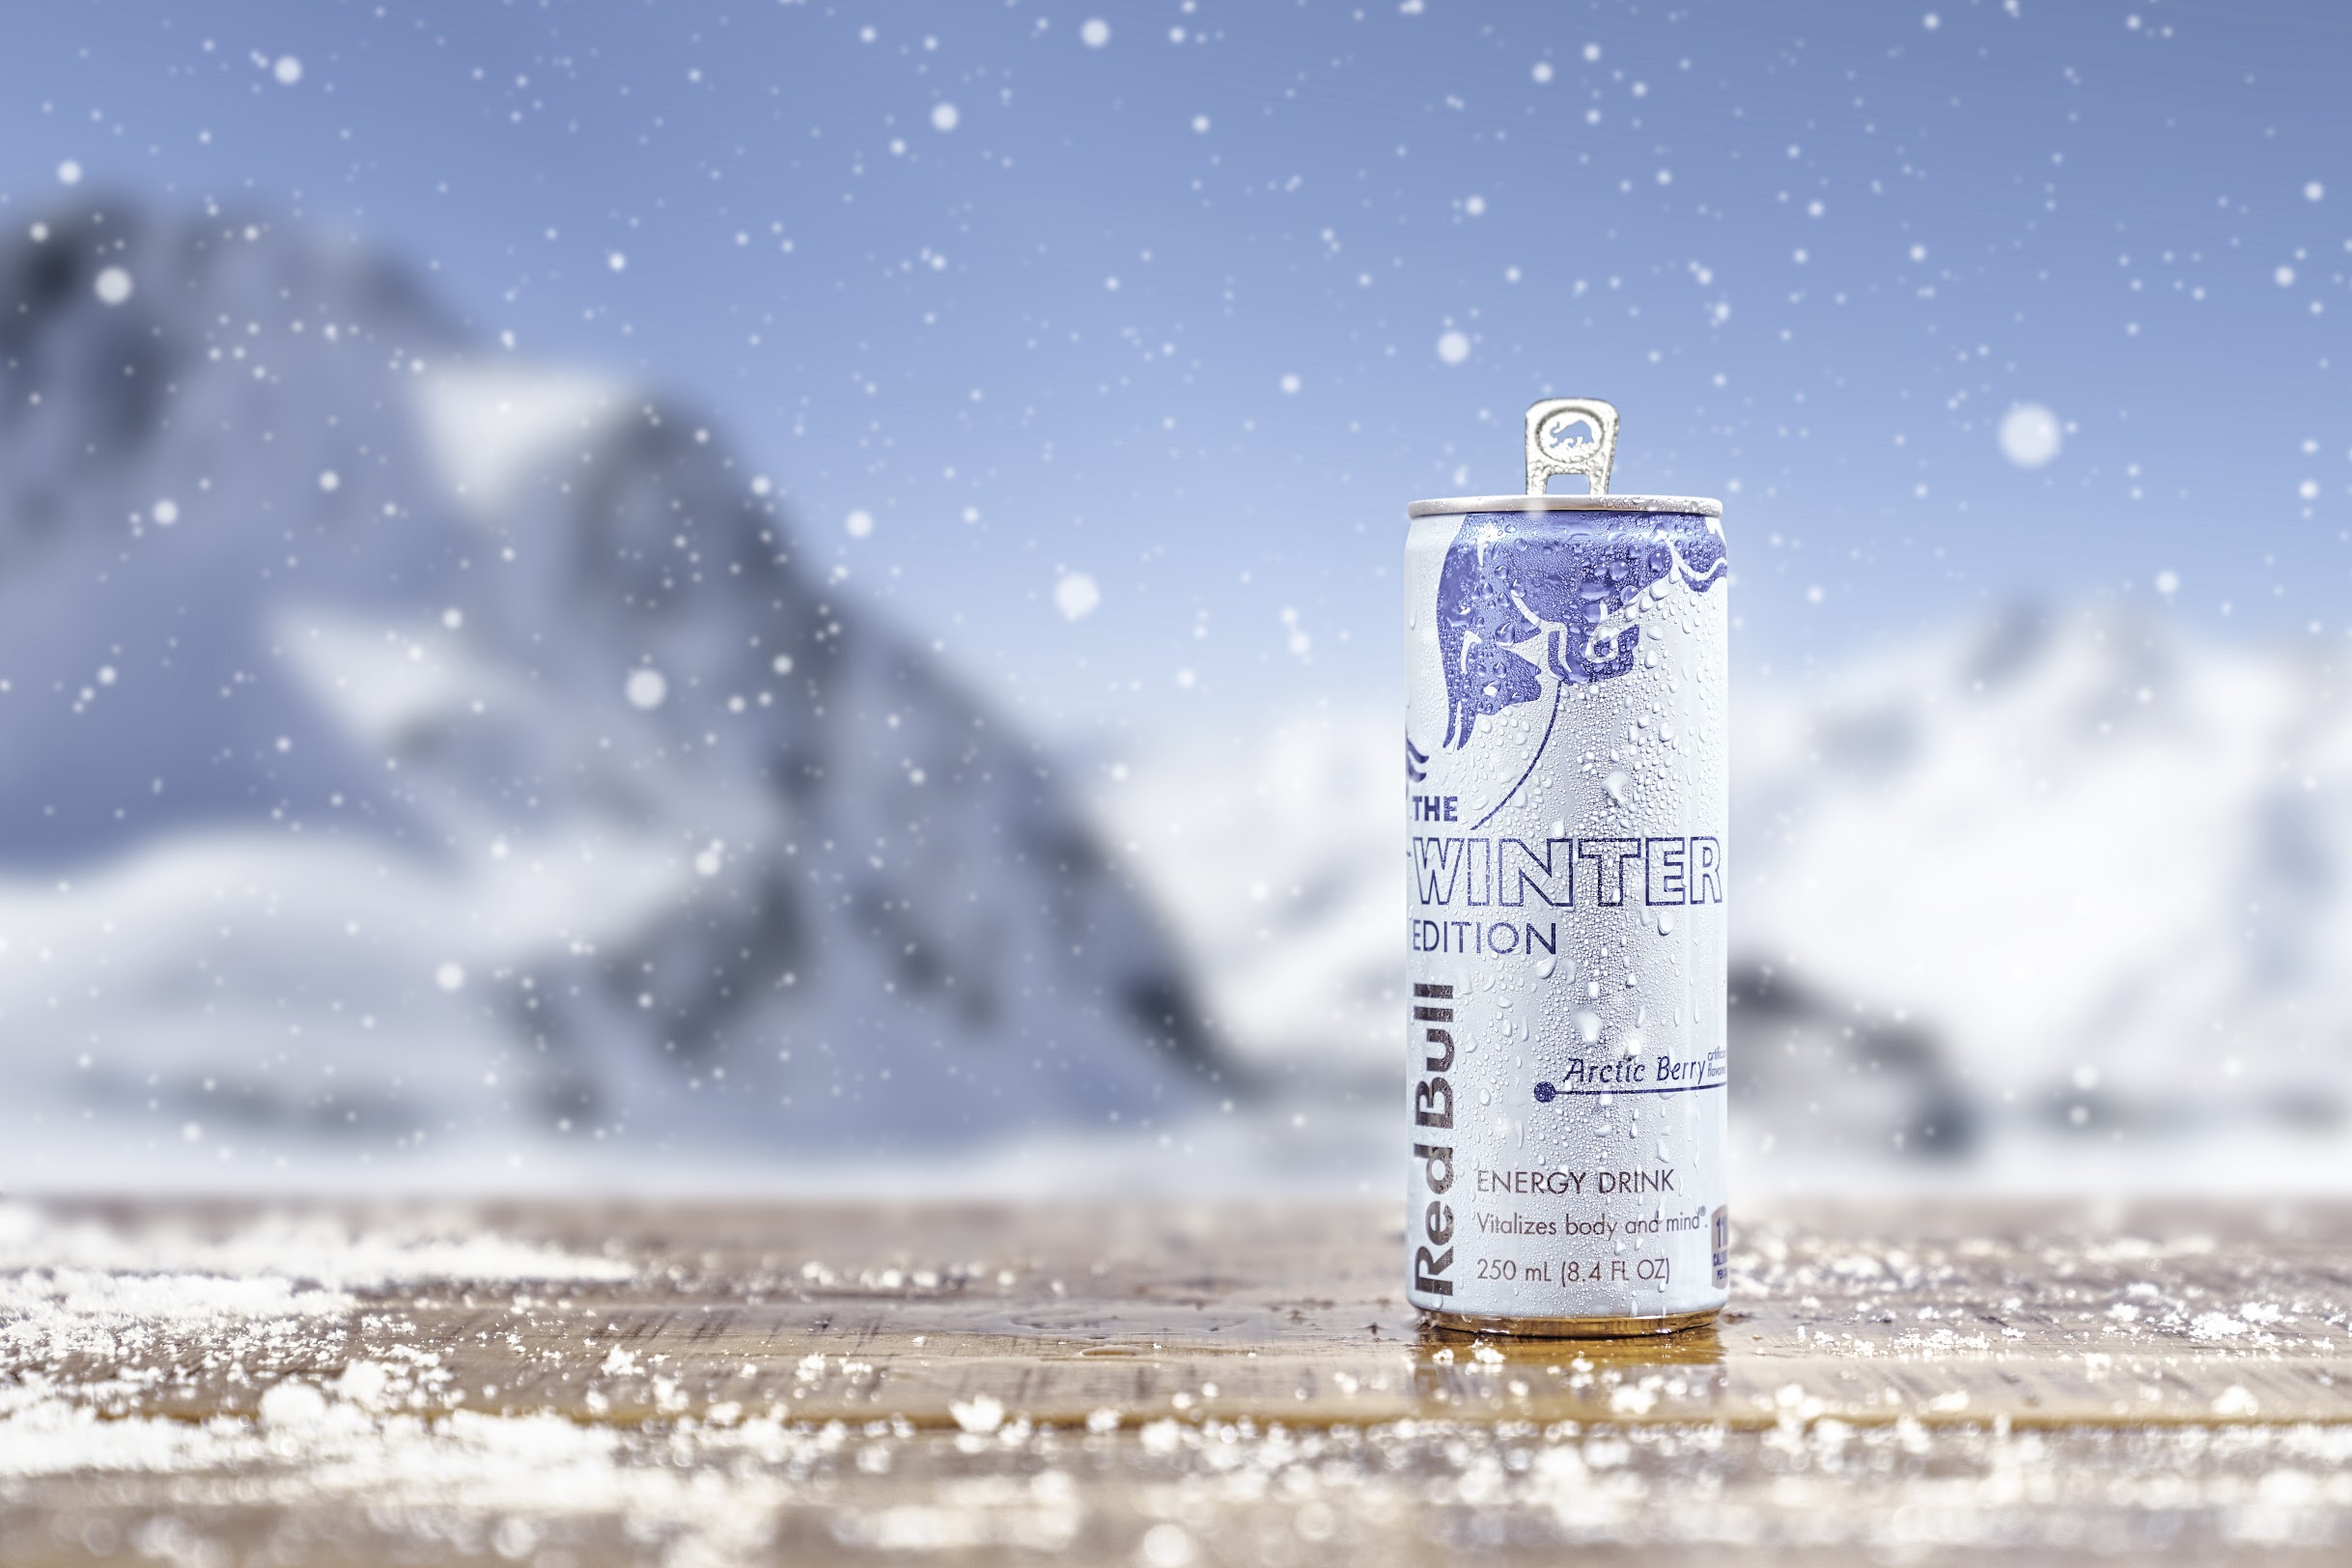 Red Bull Edition Arctic Berry offers a sip of crisp refreshment